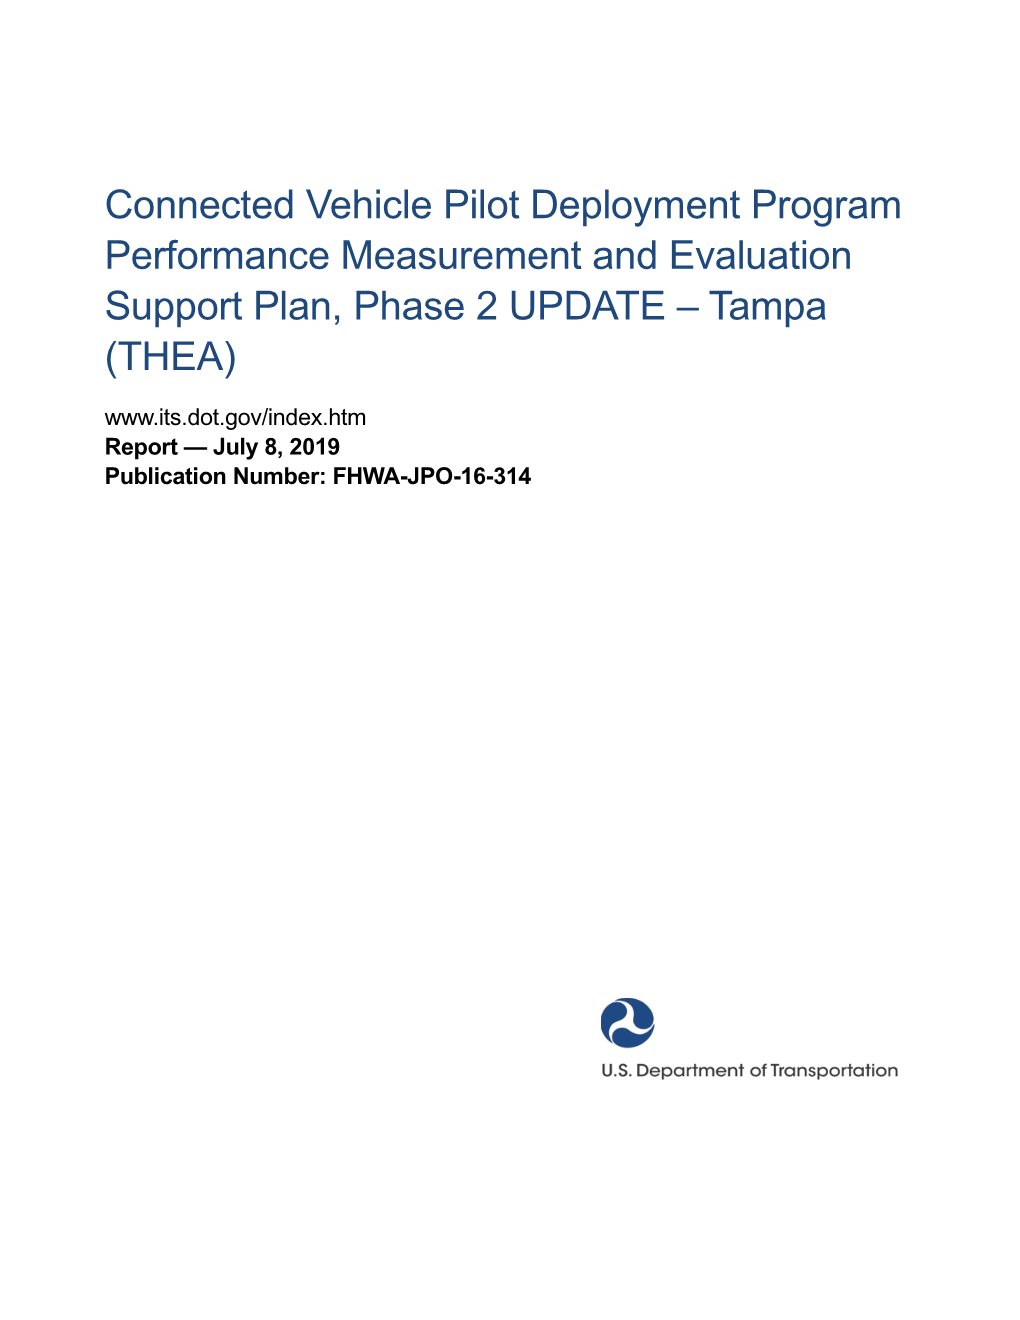 Connected Vehicle Pilot Deployment Program, Performance Measurement and July 8, 2019 Evaluation Support Plan, Phase 2 UPDATE – Tampa Hillsborough Expressway 6